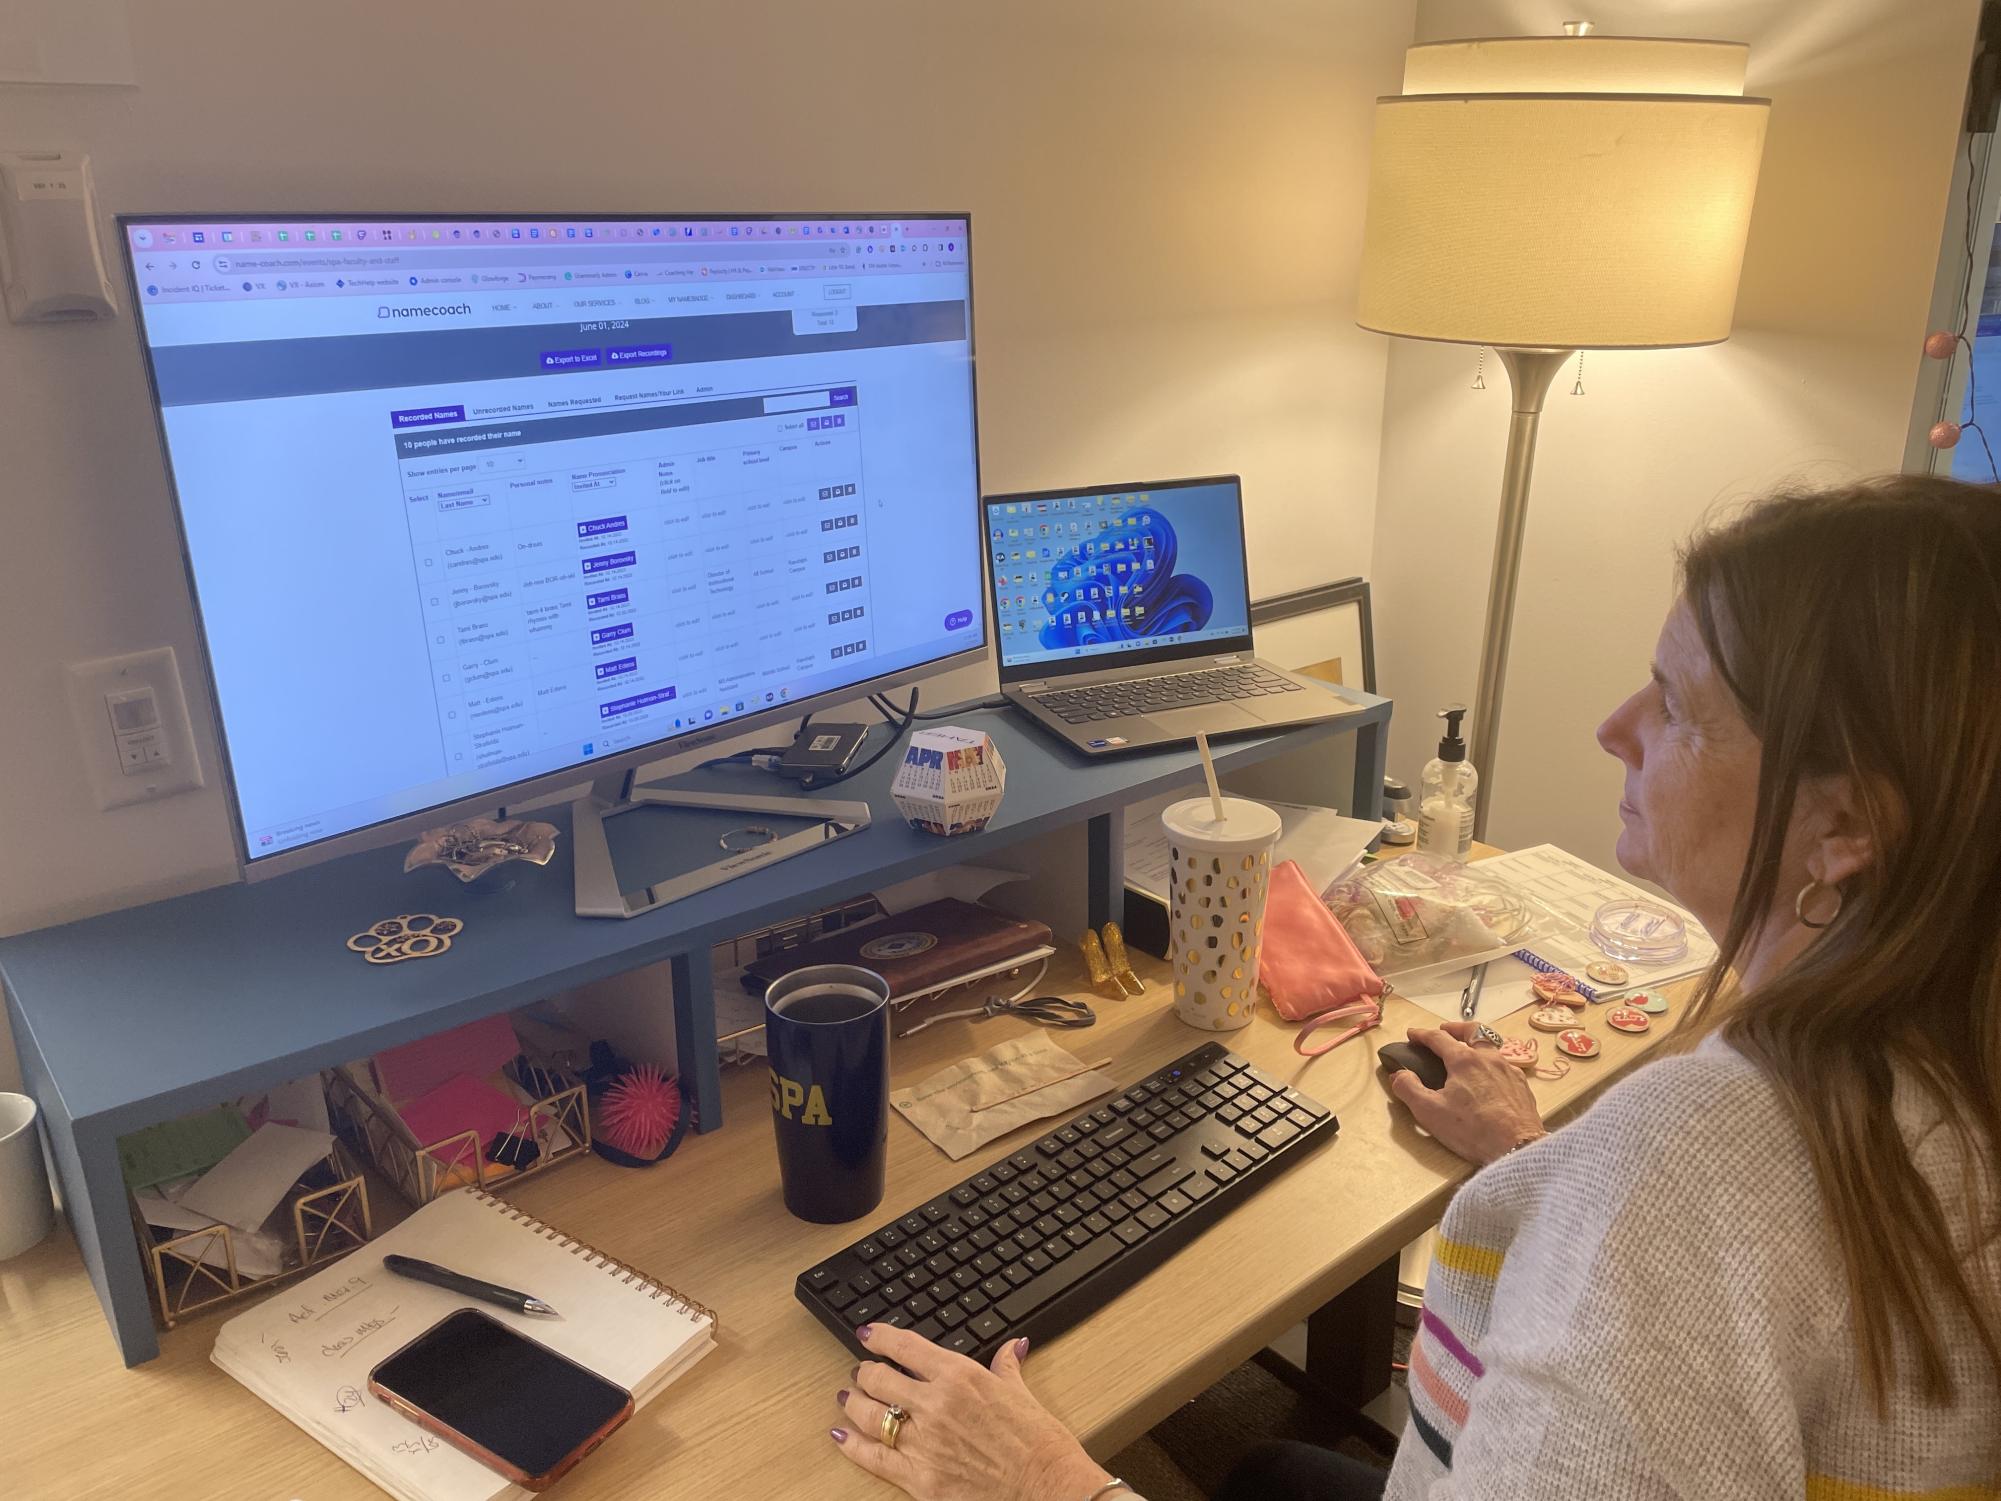 NAMECOACH IN ACTION. US Technology Coordinator Angie Kritta displays the Namecoach software that teachers began using this January. This software was tested out a few years ago by seniors. “Namecoach is a huge step in
making the community more inclusive,” Kritta said.